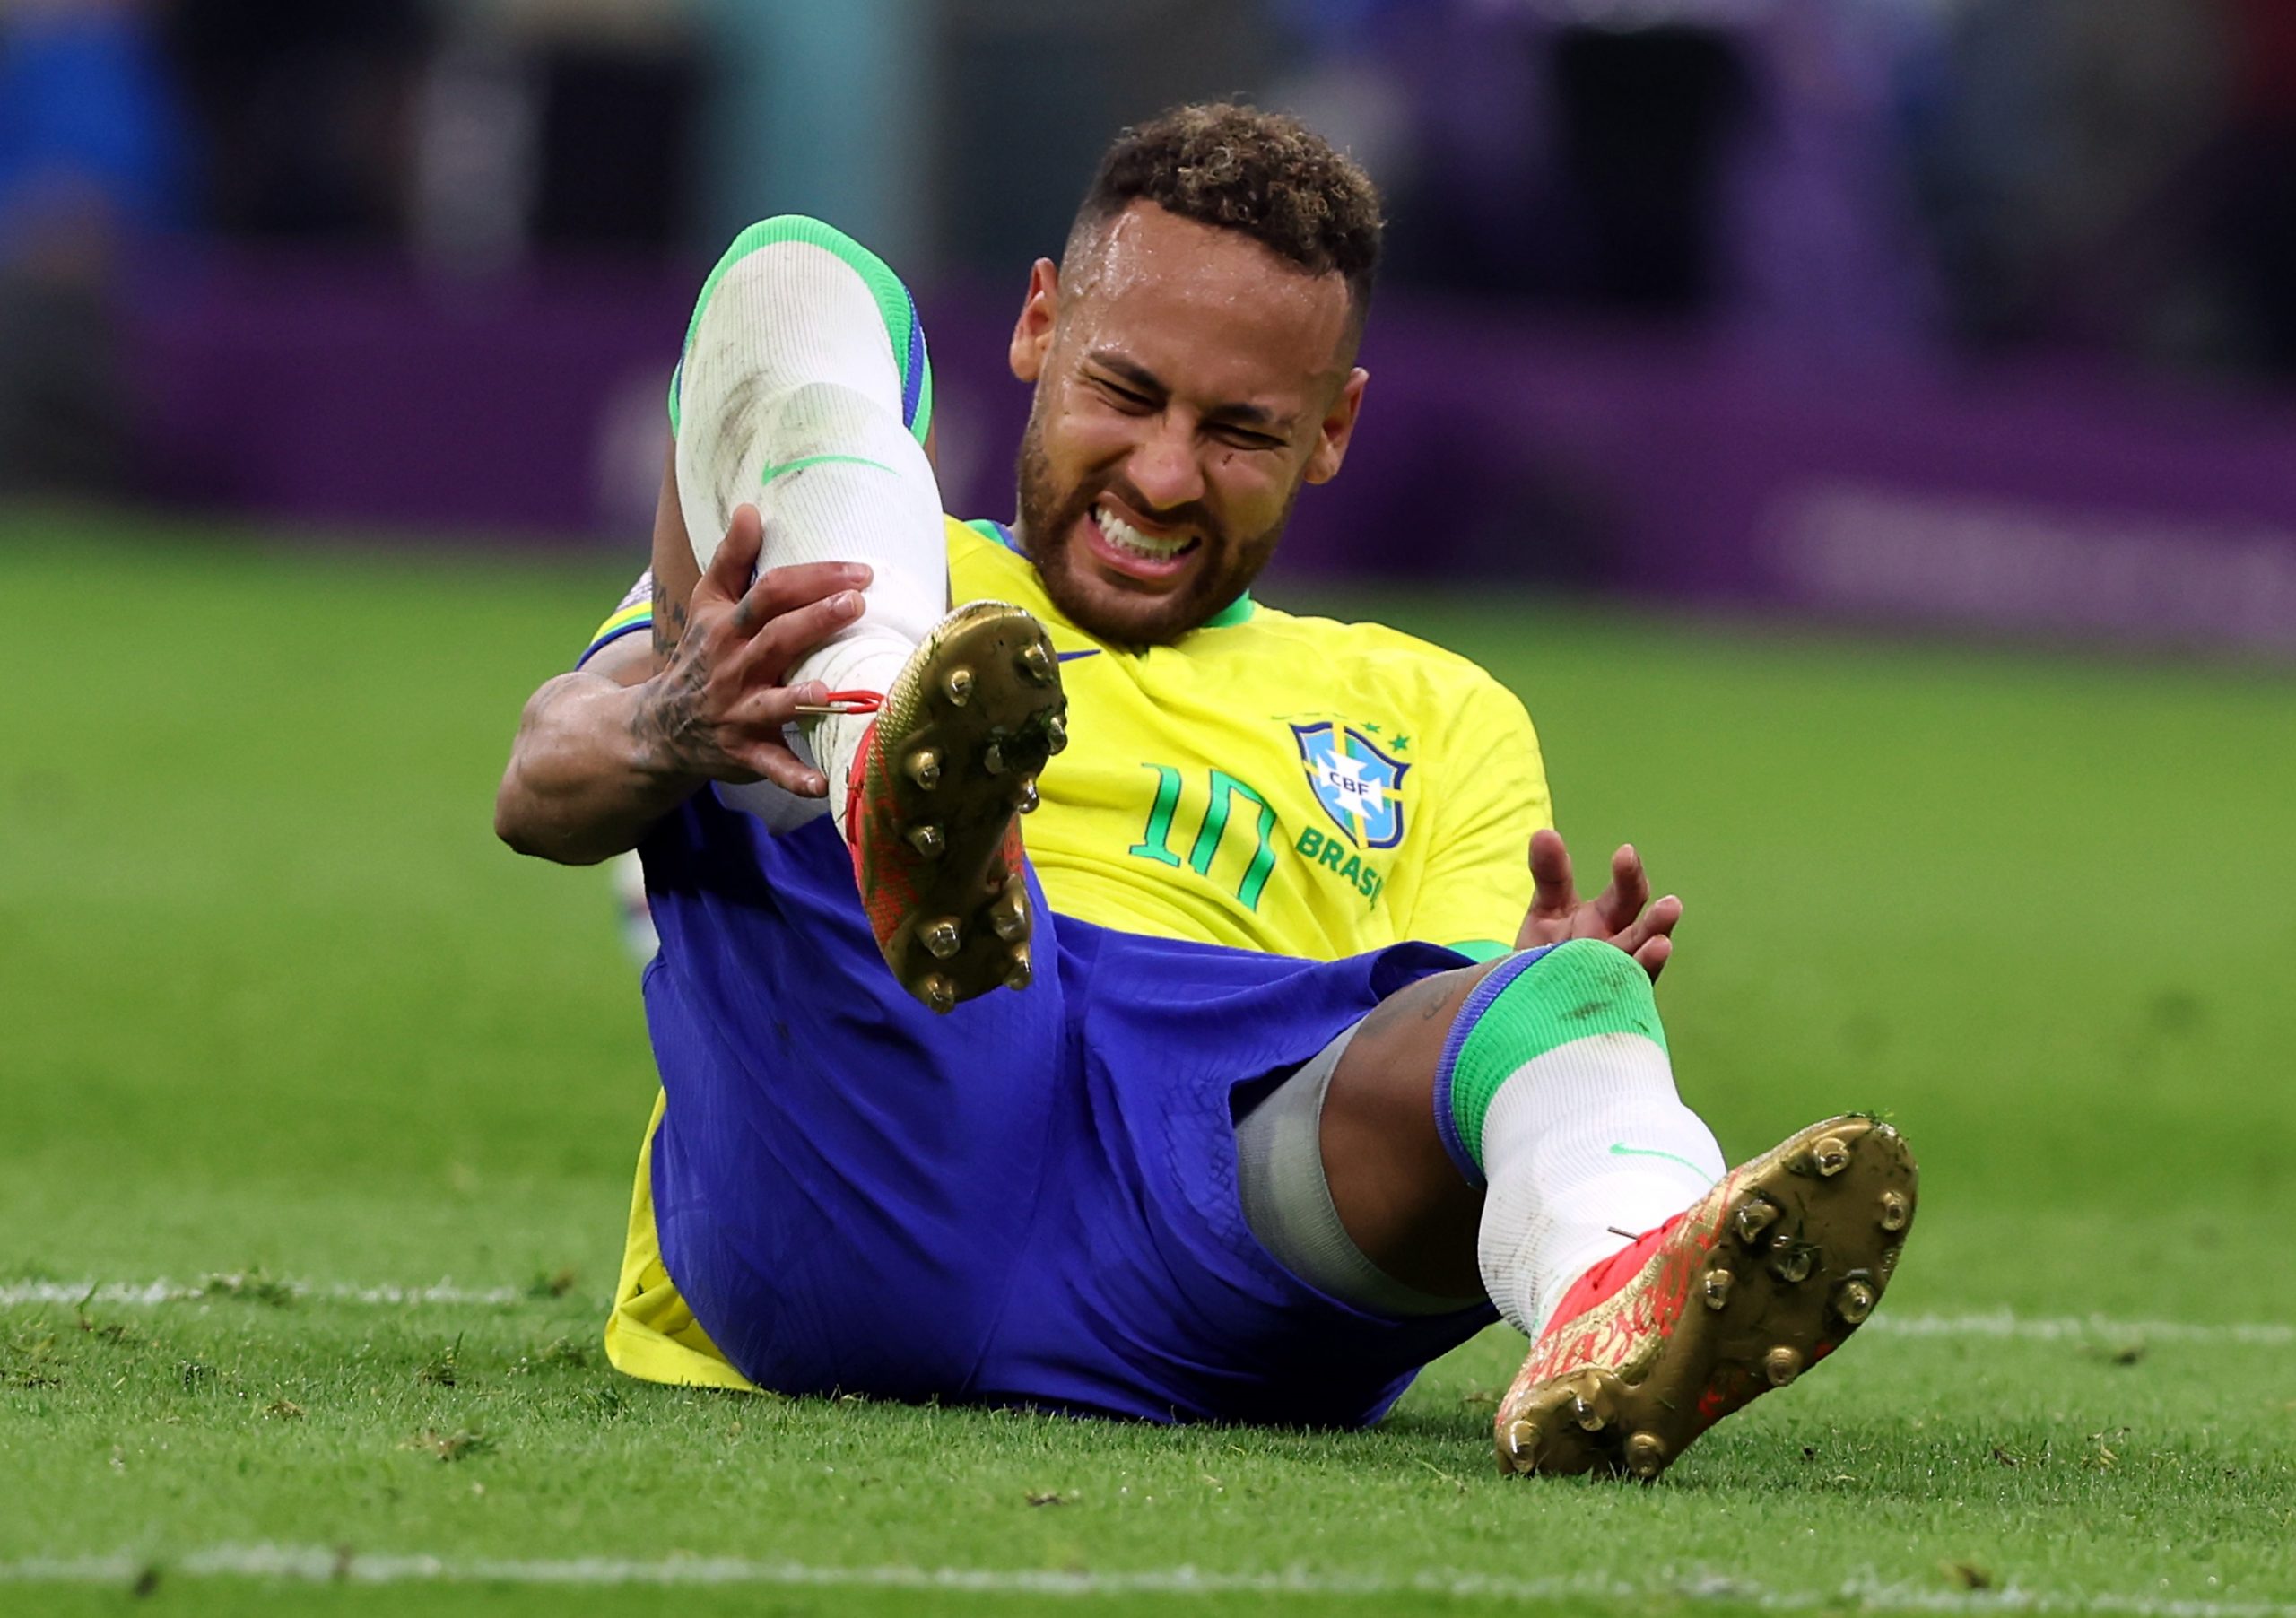 epa10326177 Neymar of Brazil reacts during the FIFA World Cup 2022 group G soccer match between Brazil and Serbia at Lusail Stadium in Lusail, Qatar, 24 November 2022.  EPA/Tolga Bozoglu